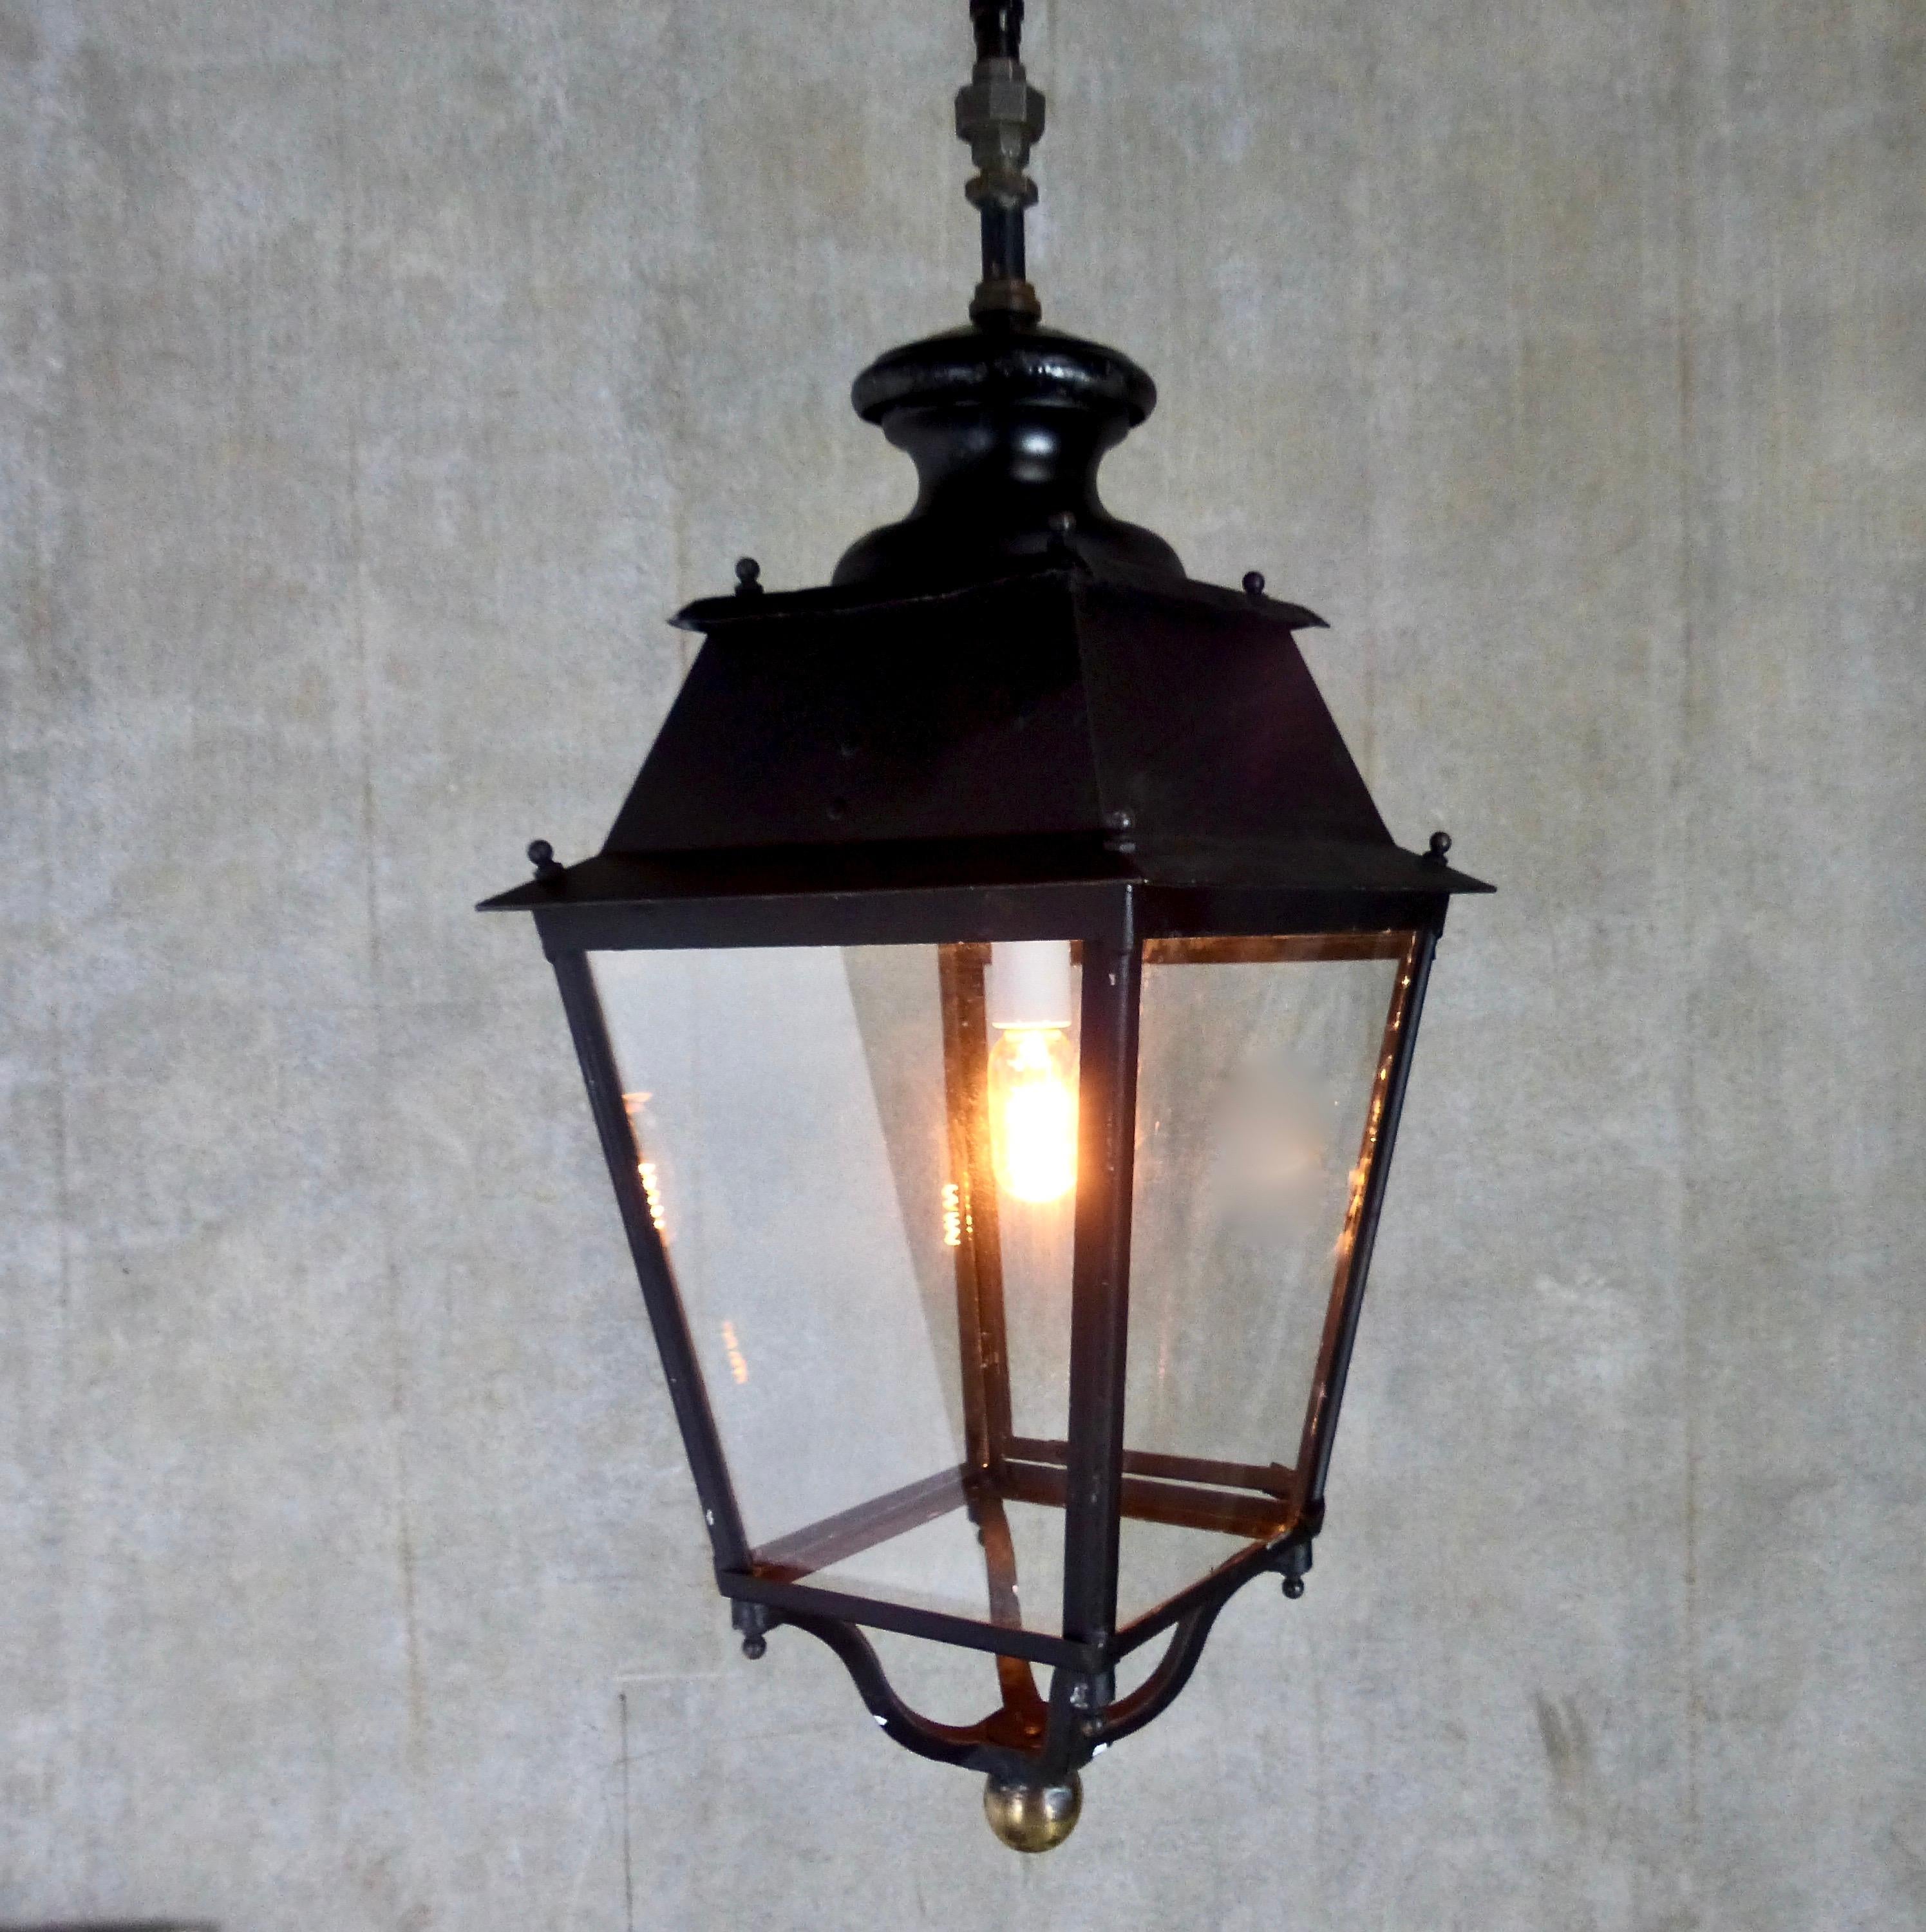 Sturdy cast iron lantern from circa 1920-1940. This pendant light is substantial, and features brass details. Four glass panels (one opens to replace bulbs) and a cast iron cap. Re-wired and inspected and approved to current electrical standards;